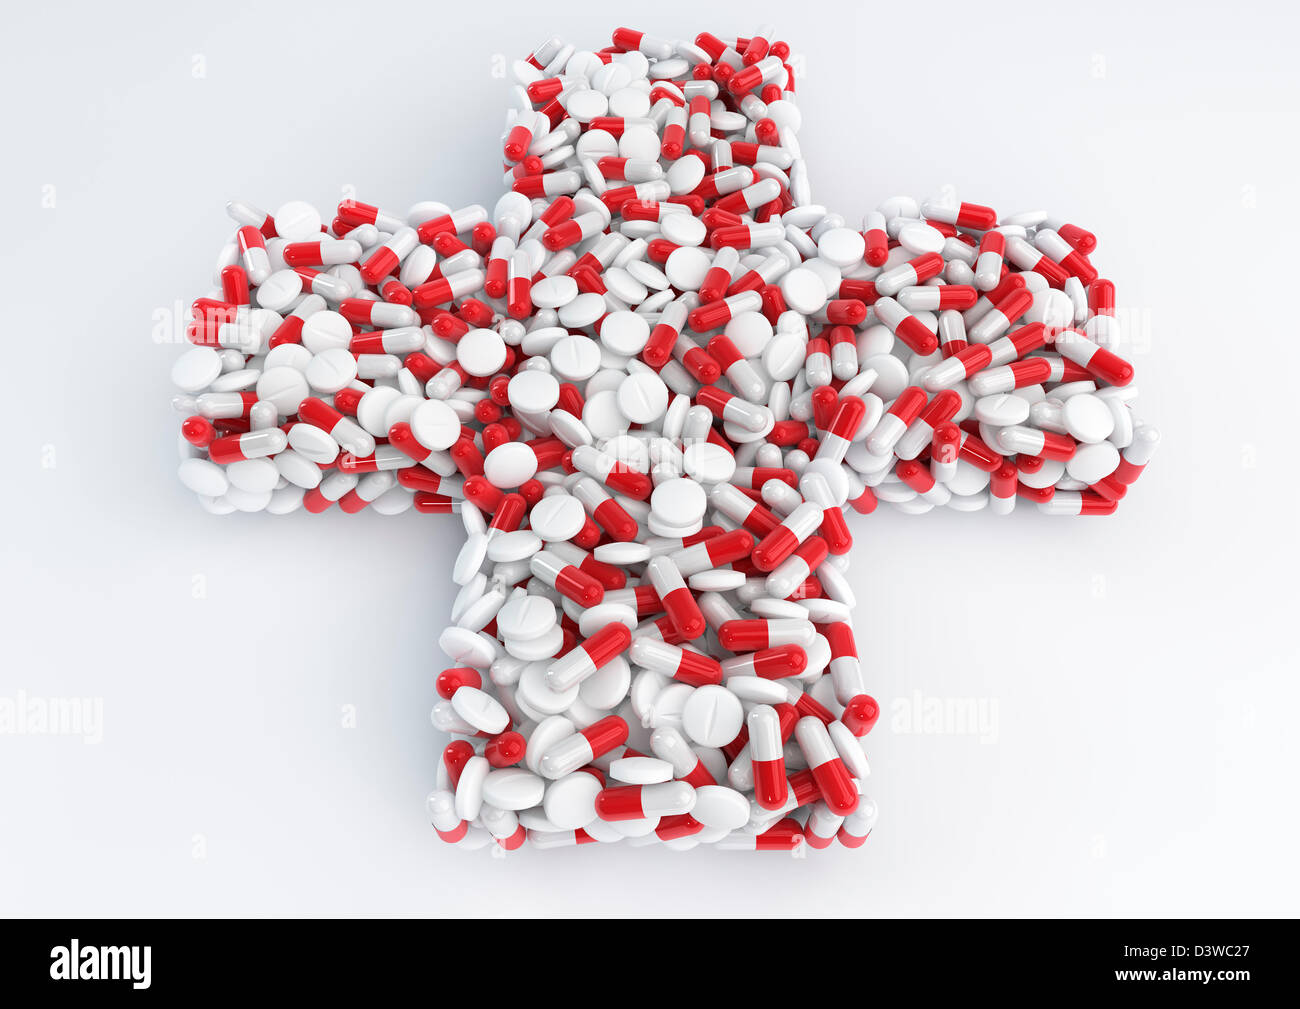 Piles of pills forming a medical cross symbol Stock Photo